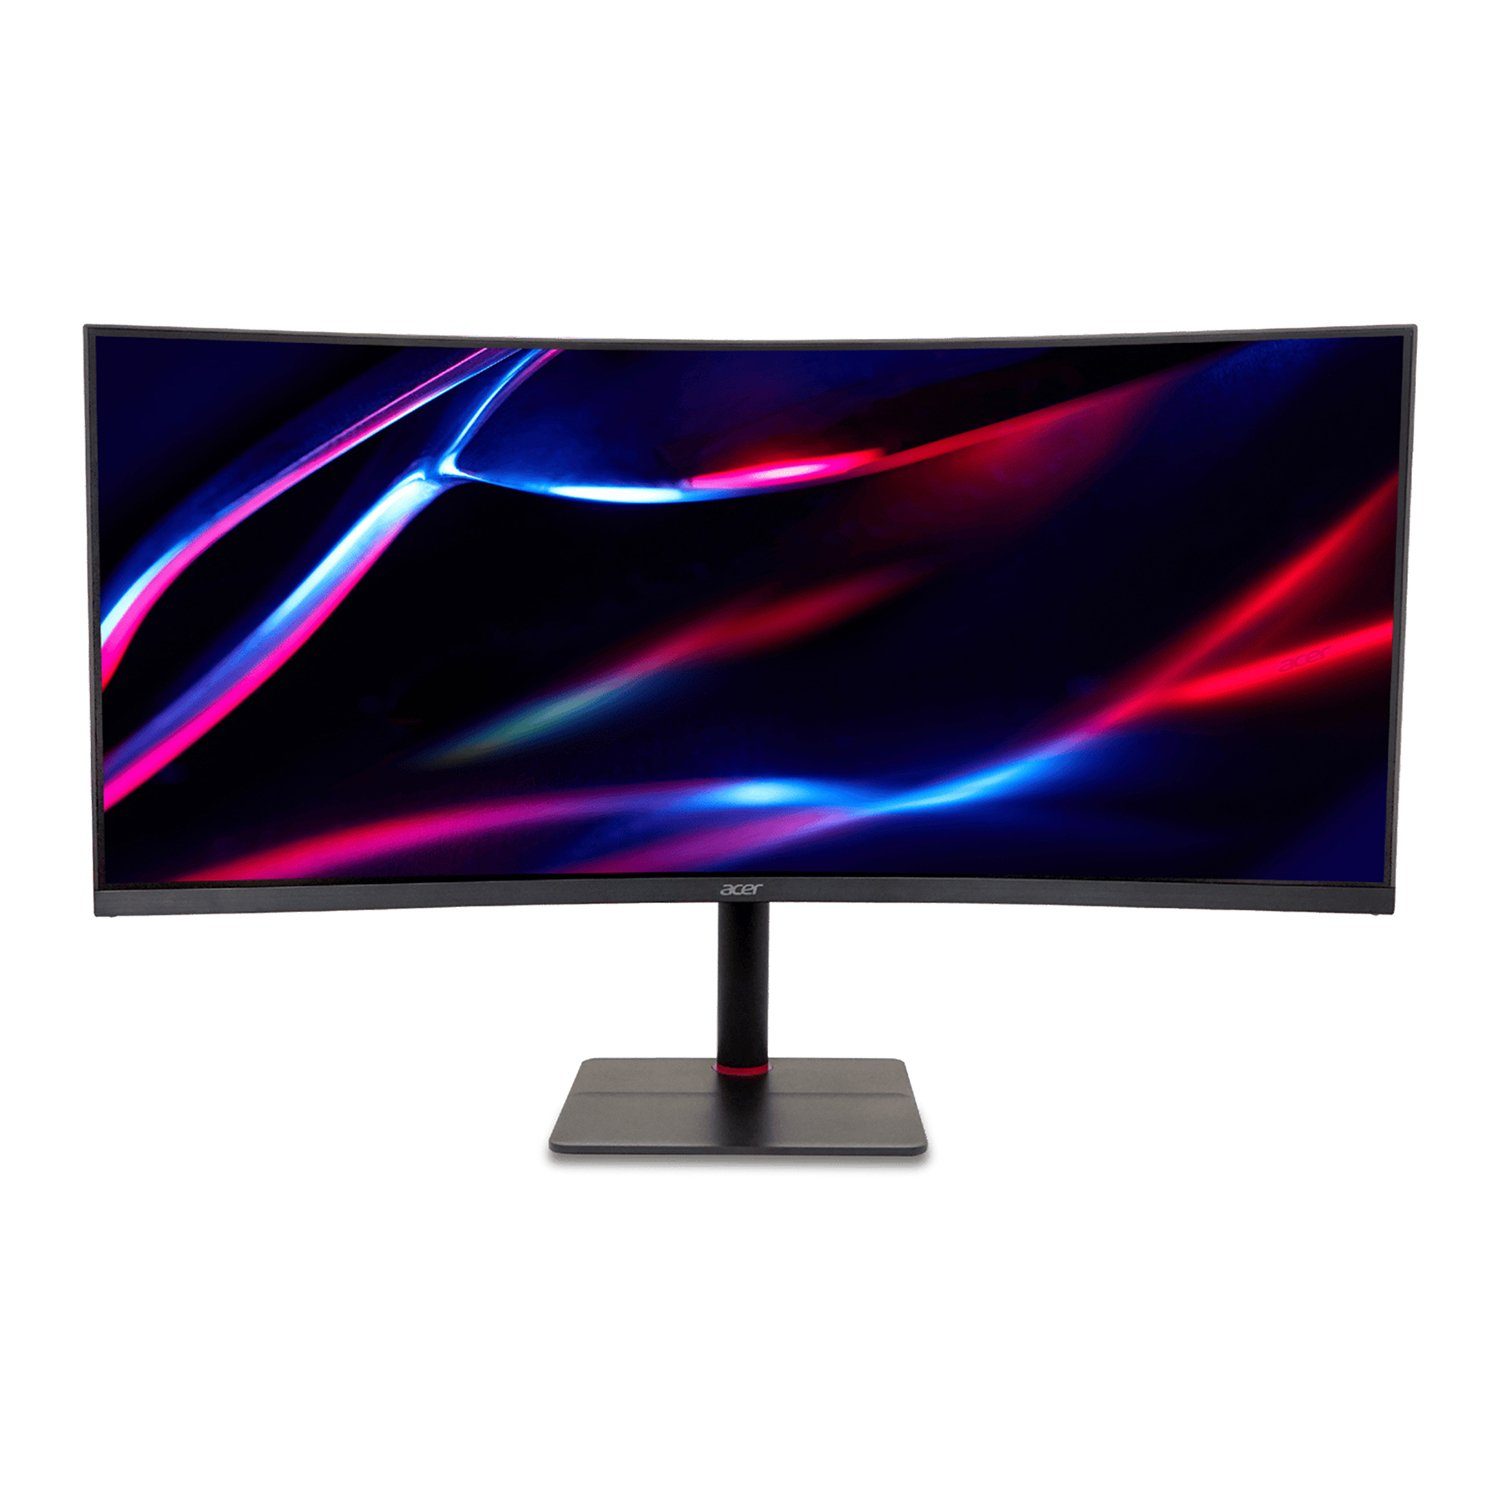 1440 ms XV345CUR 1 Reaktionszeit, cm/34 3440 Gaming-Monitor curved, (86.4 x 21:9, Acer VA, \